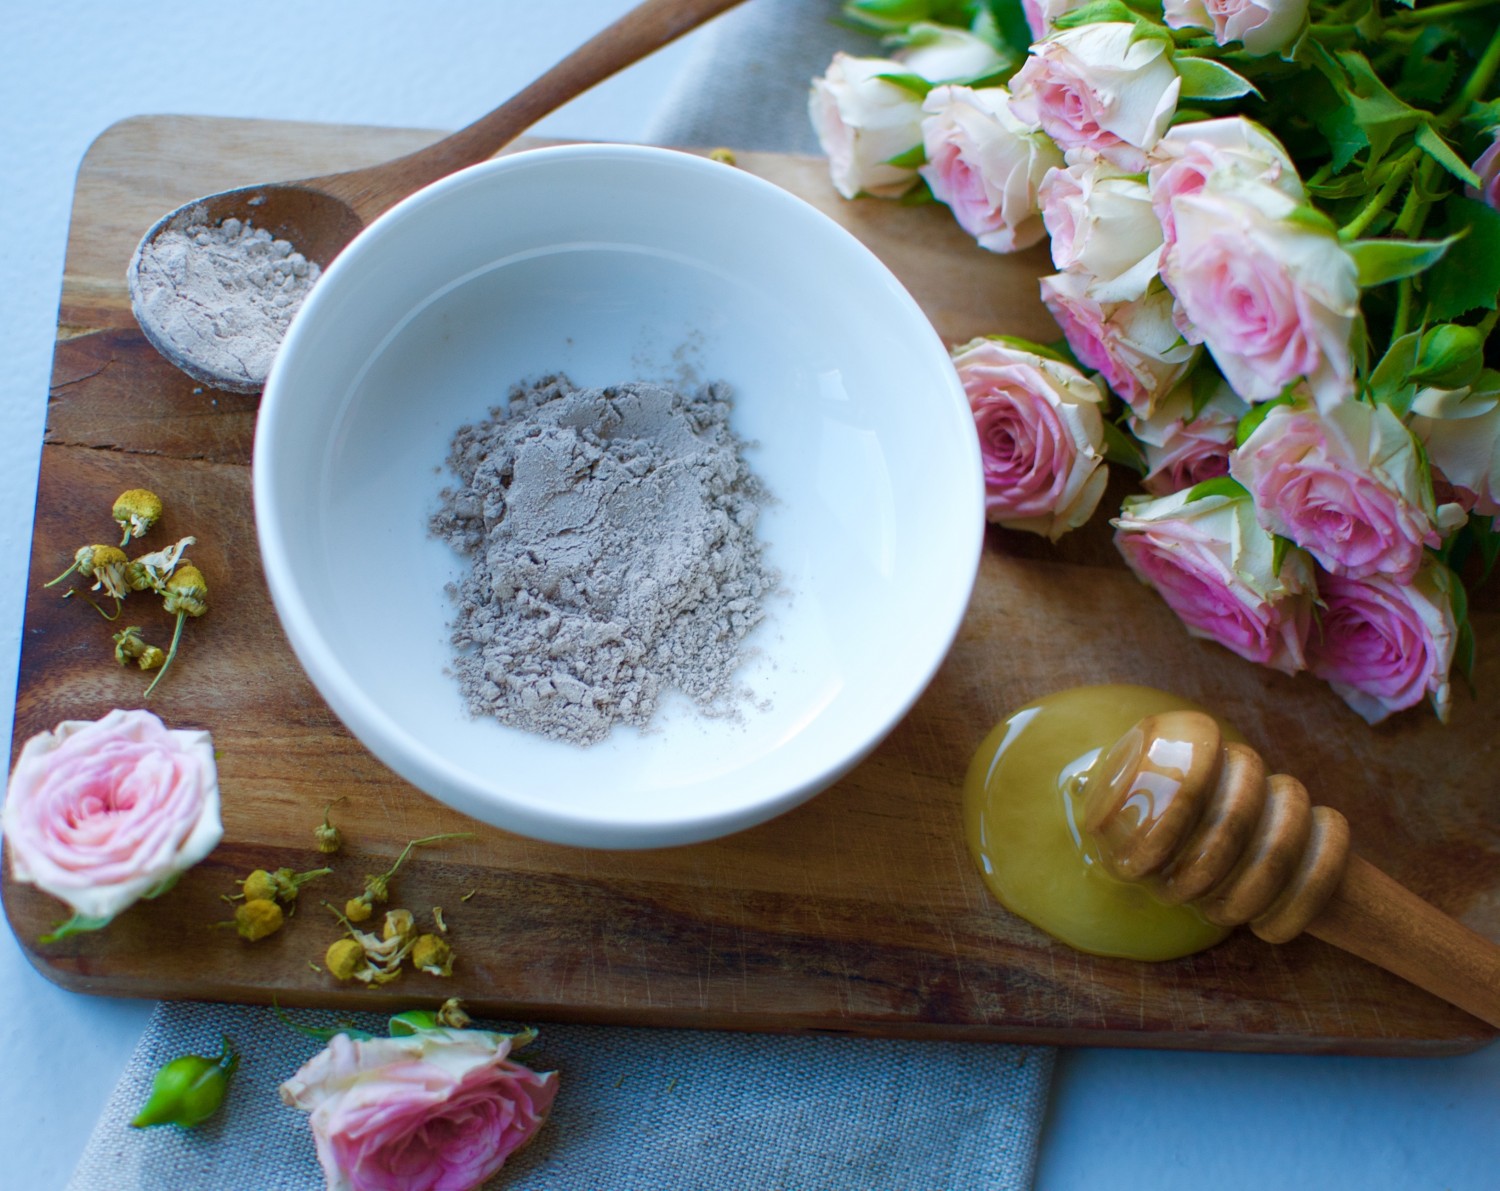 Homemade face mask with bentonite clay - deep cleansing and detoxing!